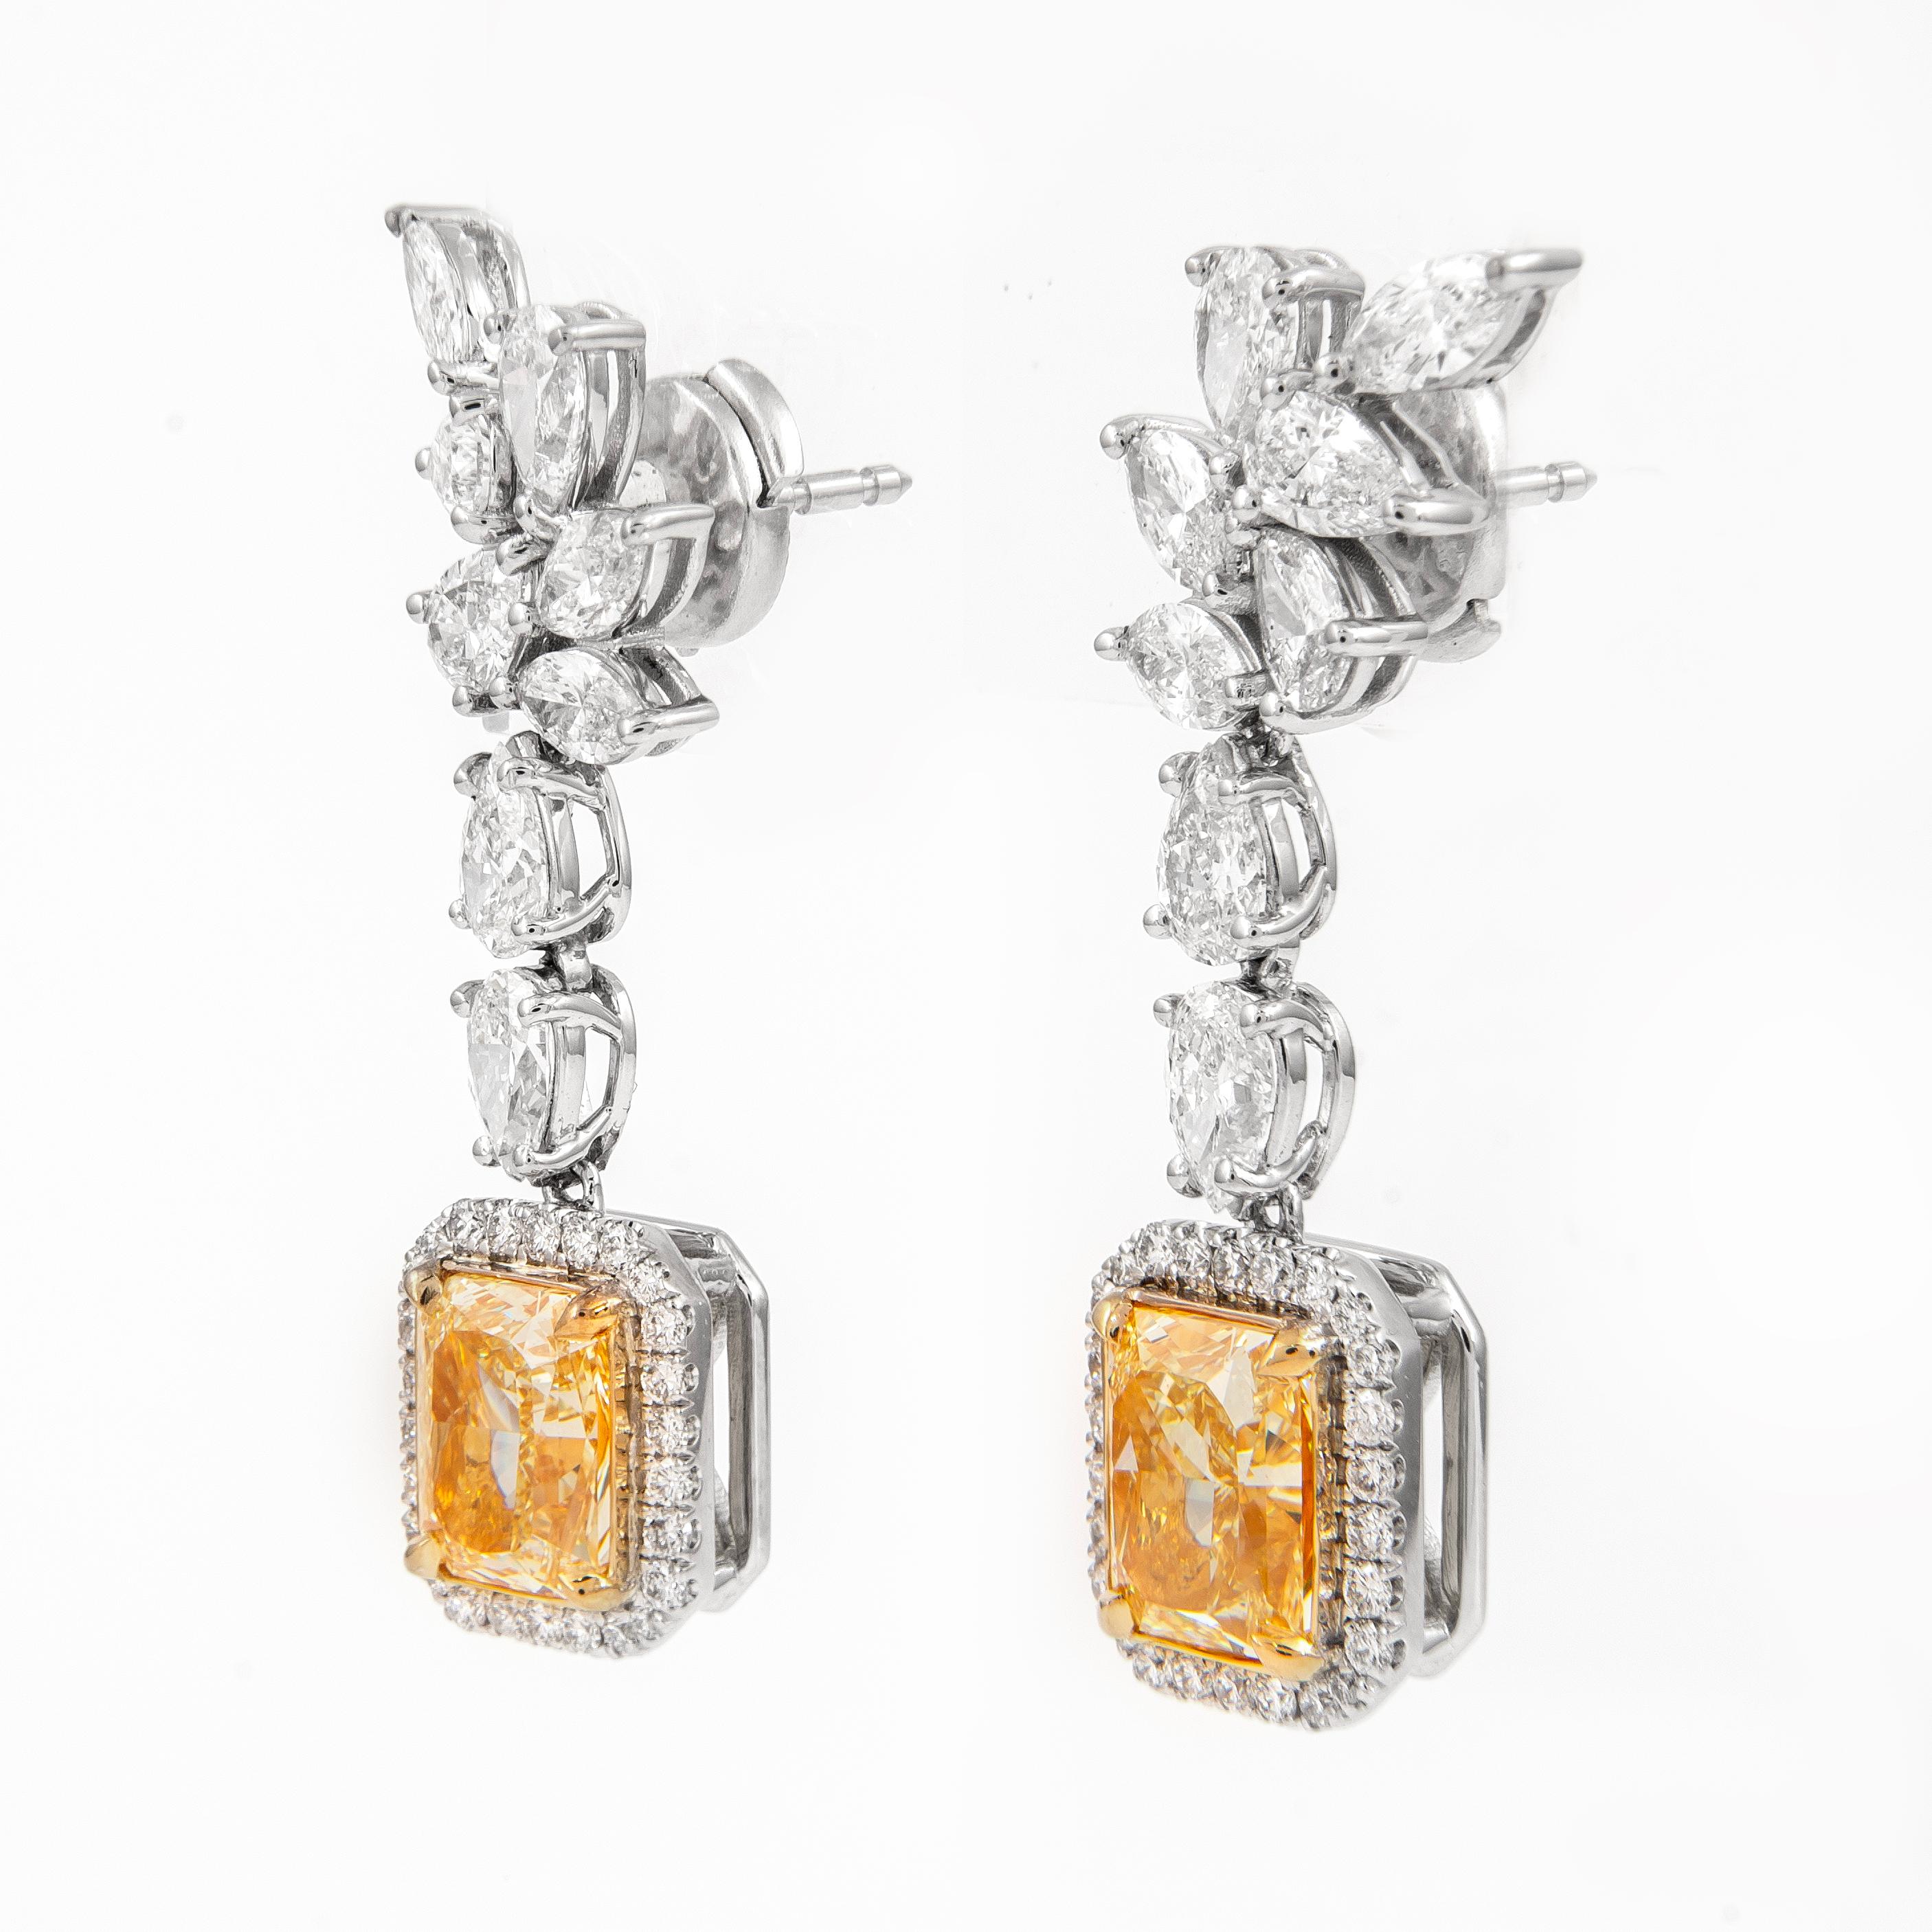 Radiant Cut Alexander GIA 4.45ct Fancy Yellow Diamond Drop Earrings with Halo 18k Gold For Sale